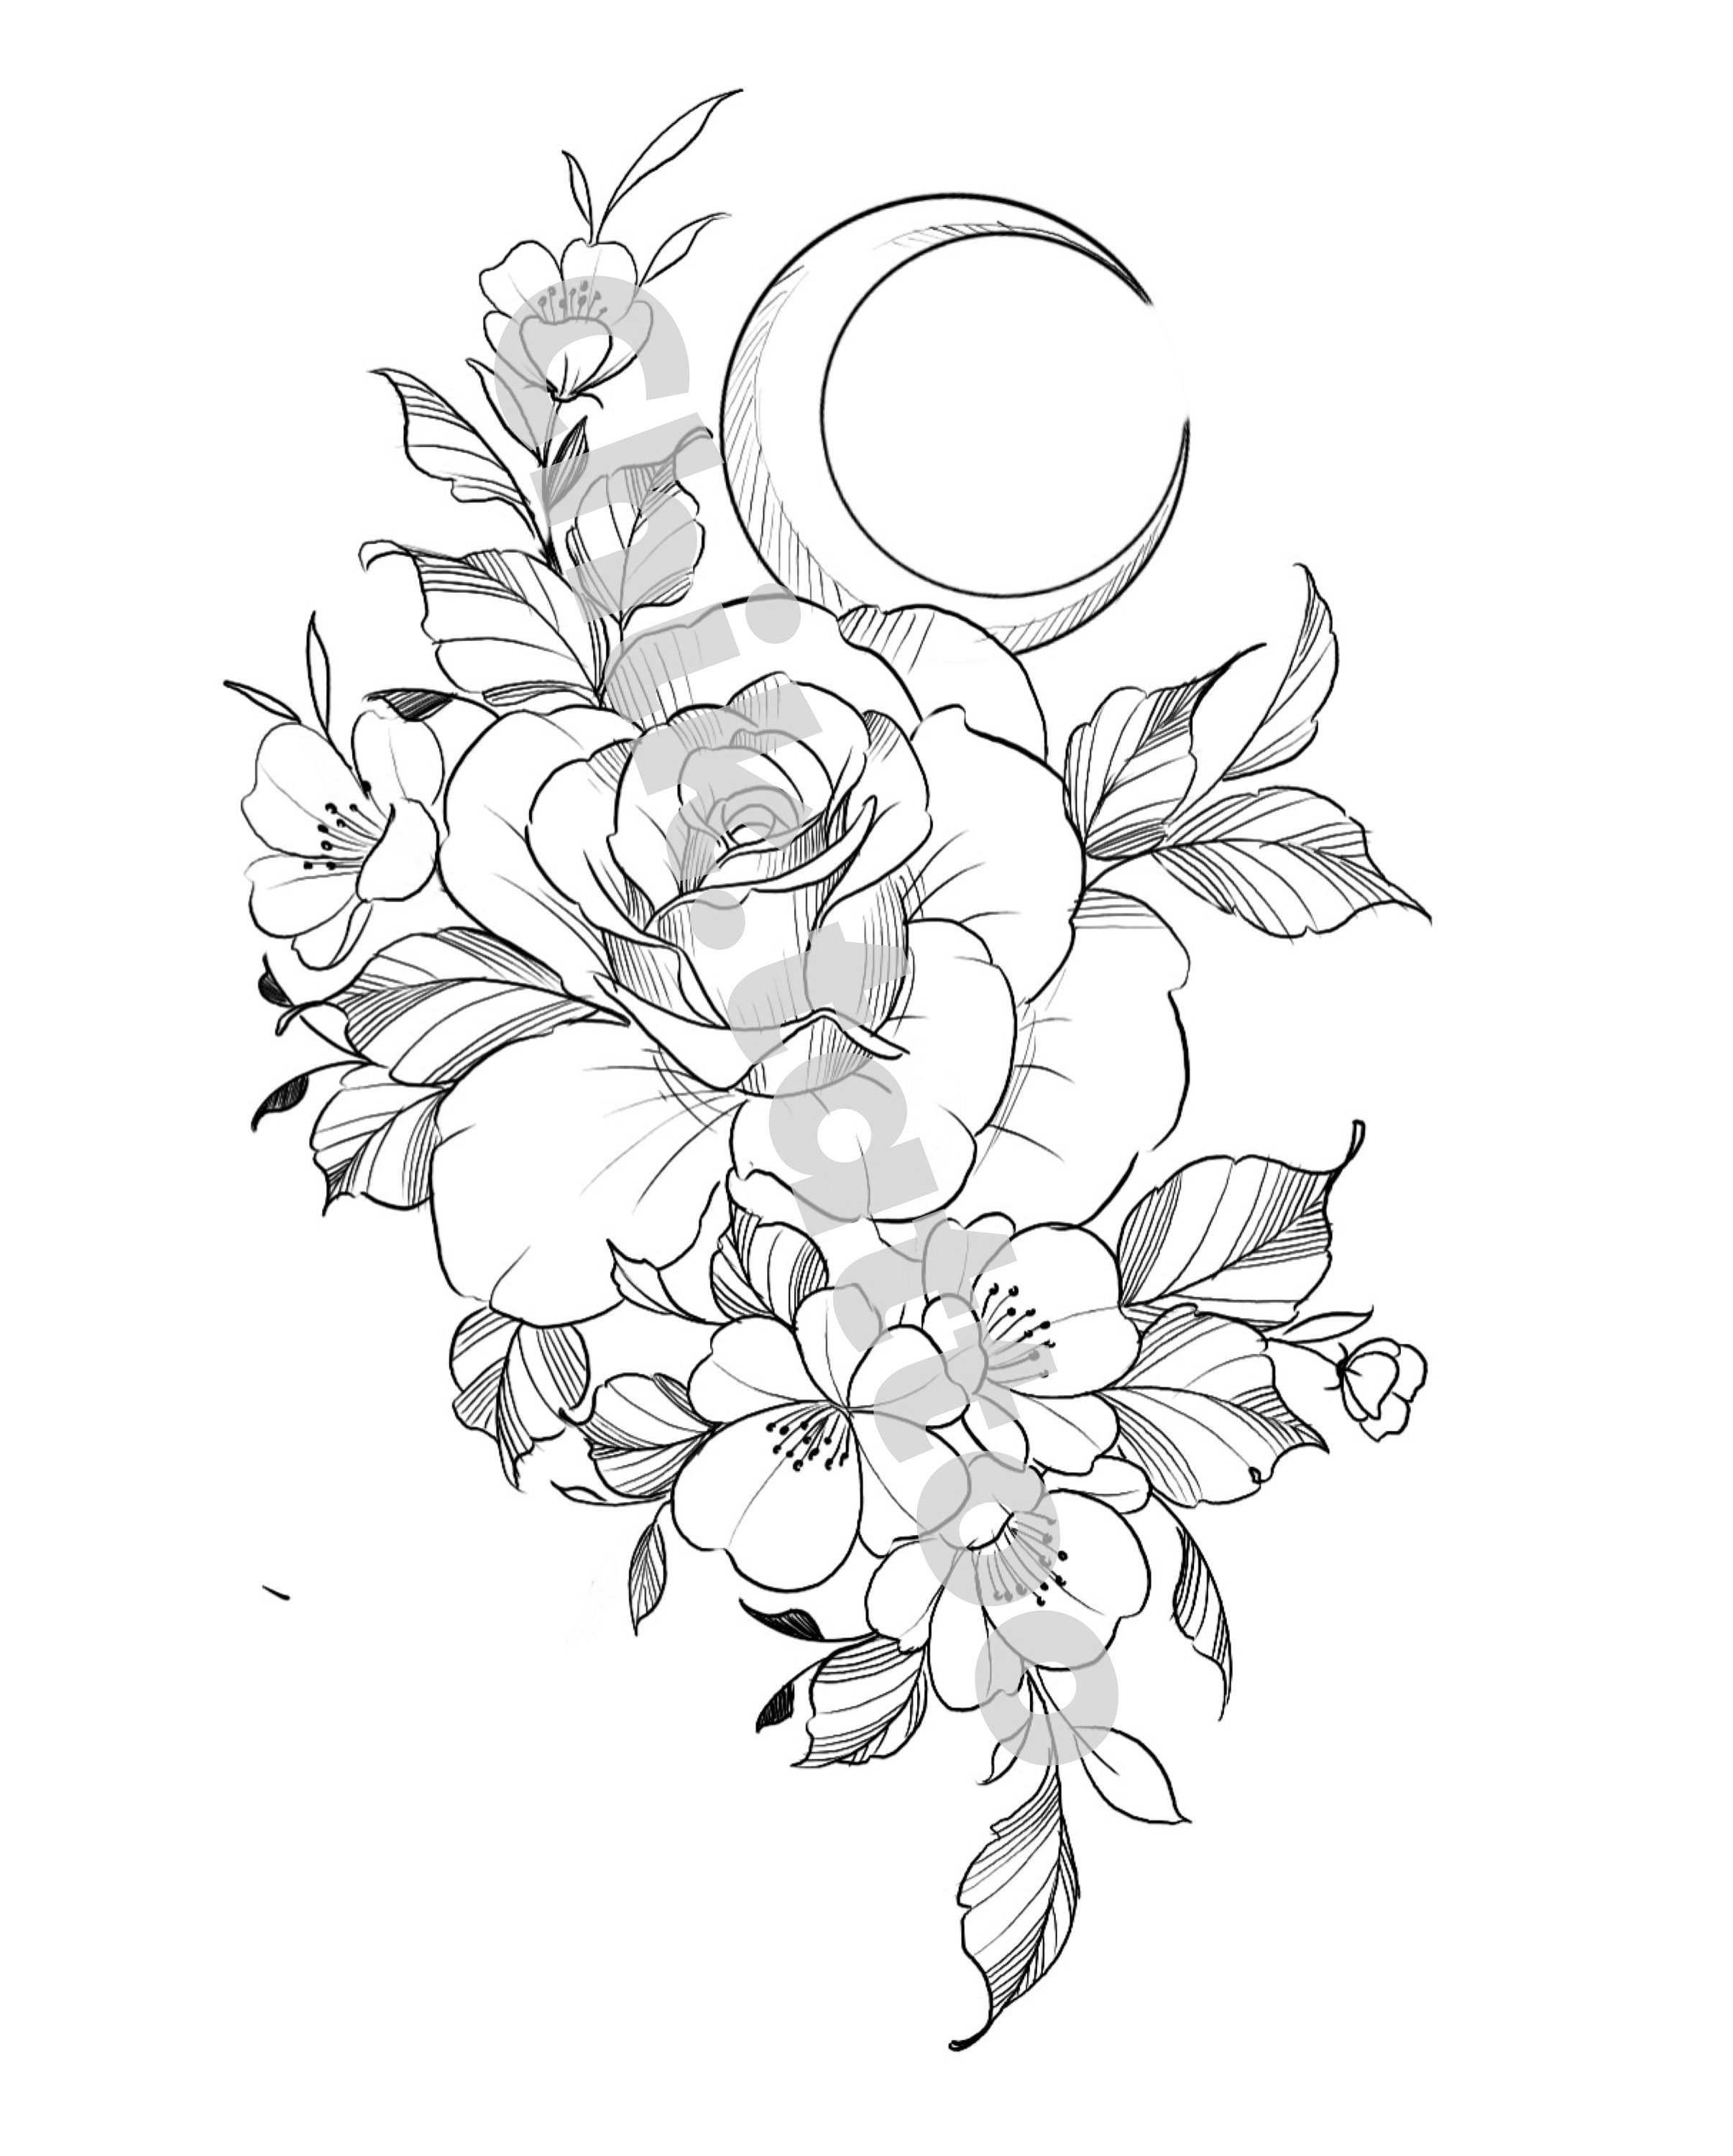 Feminine and Floral Design for Chik Tattoo Tattoo. Rose Tattoo - Etsy